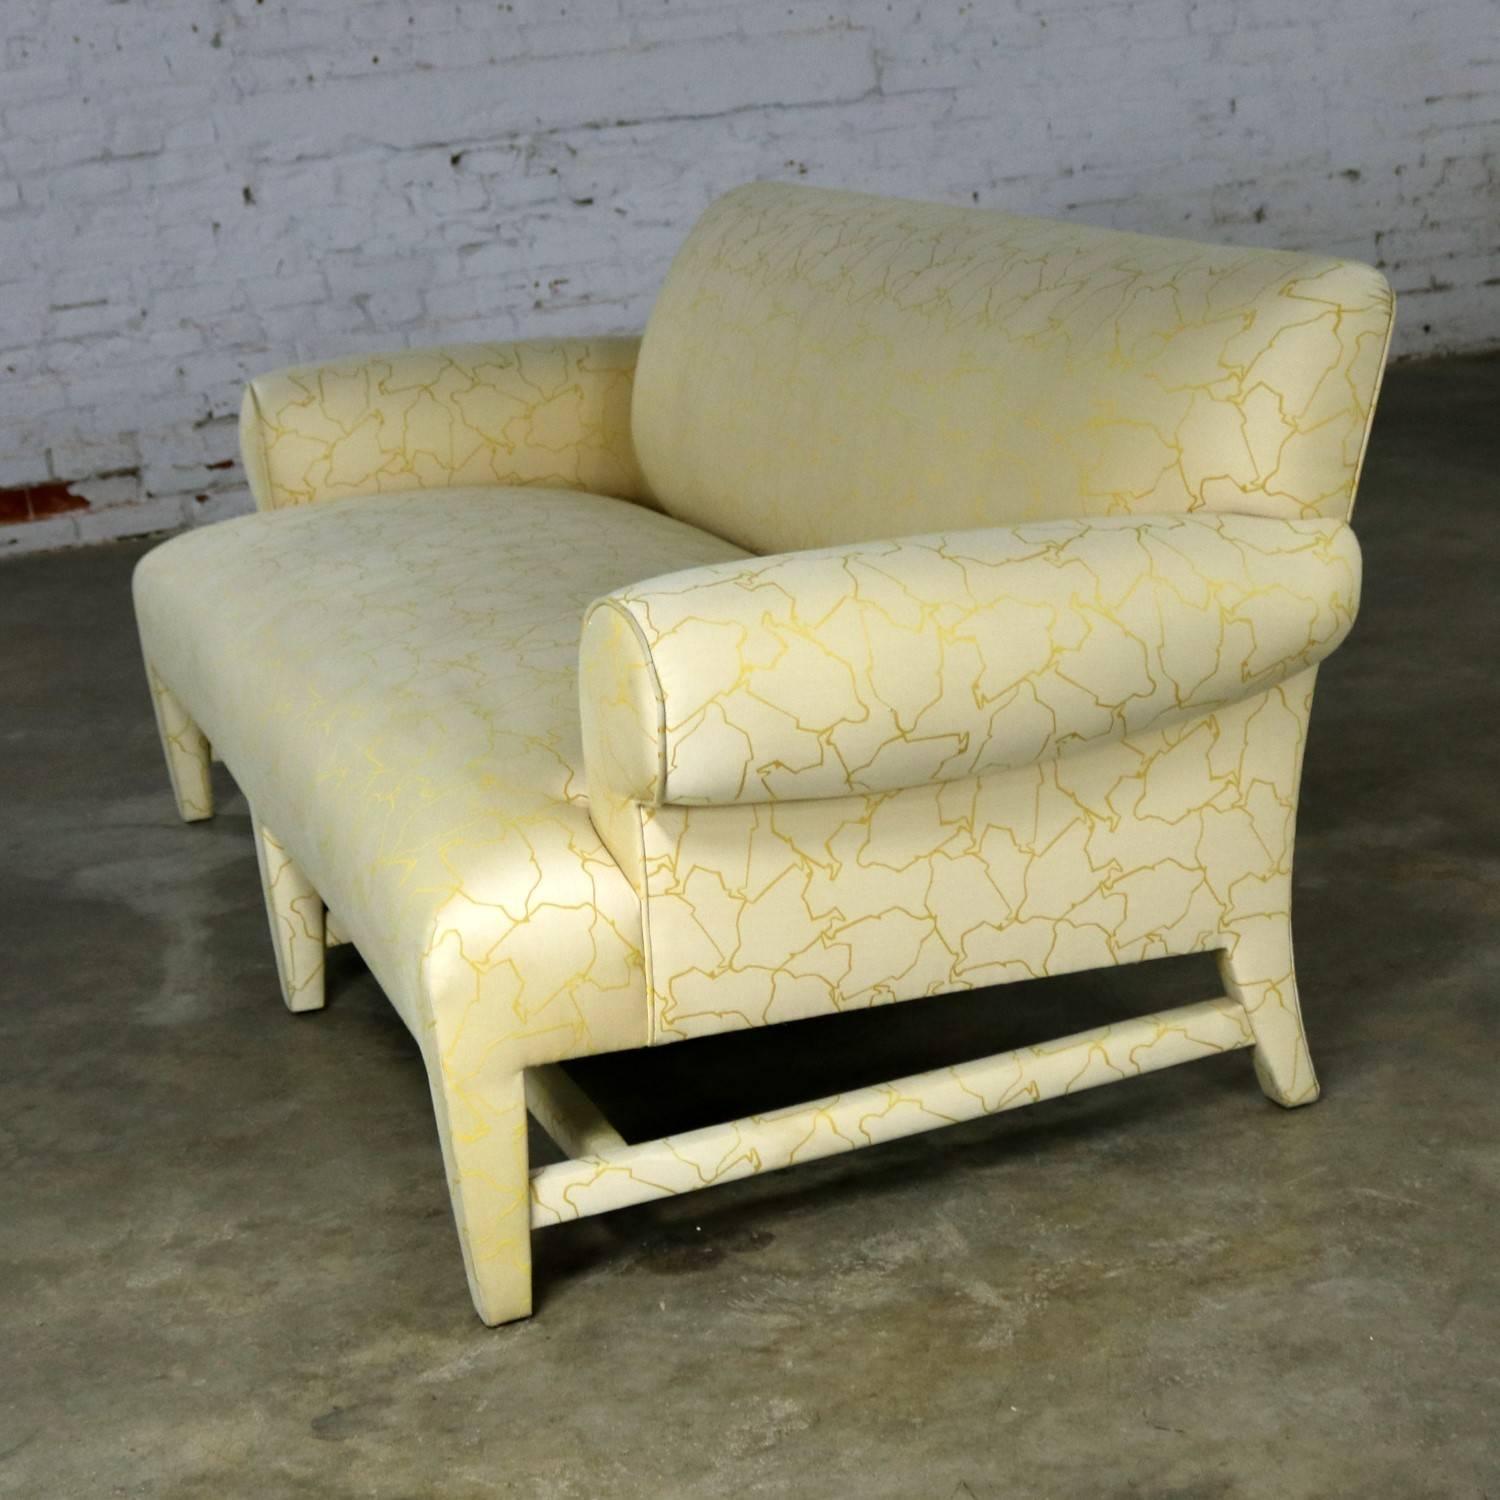 Donghia Loveseat Sofa in Cream and Yellow Fat Man Fabric Attributed to Angelo D 1